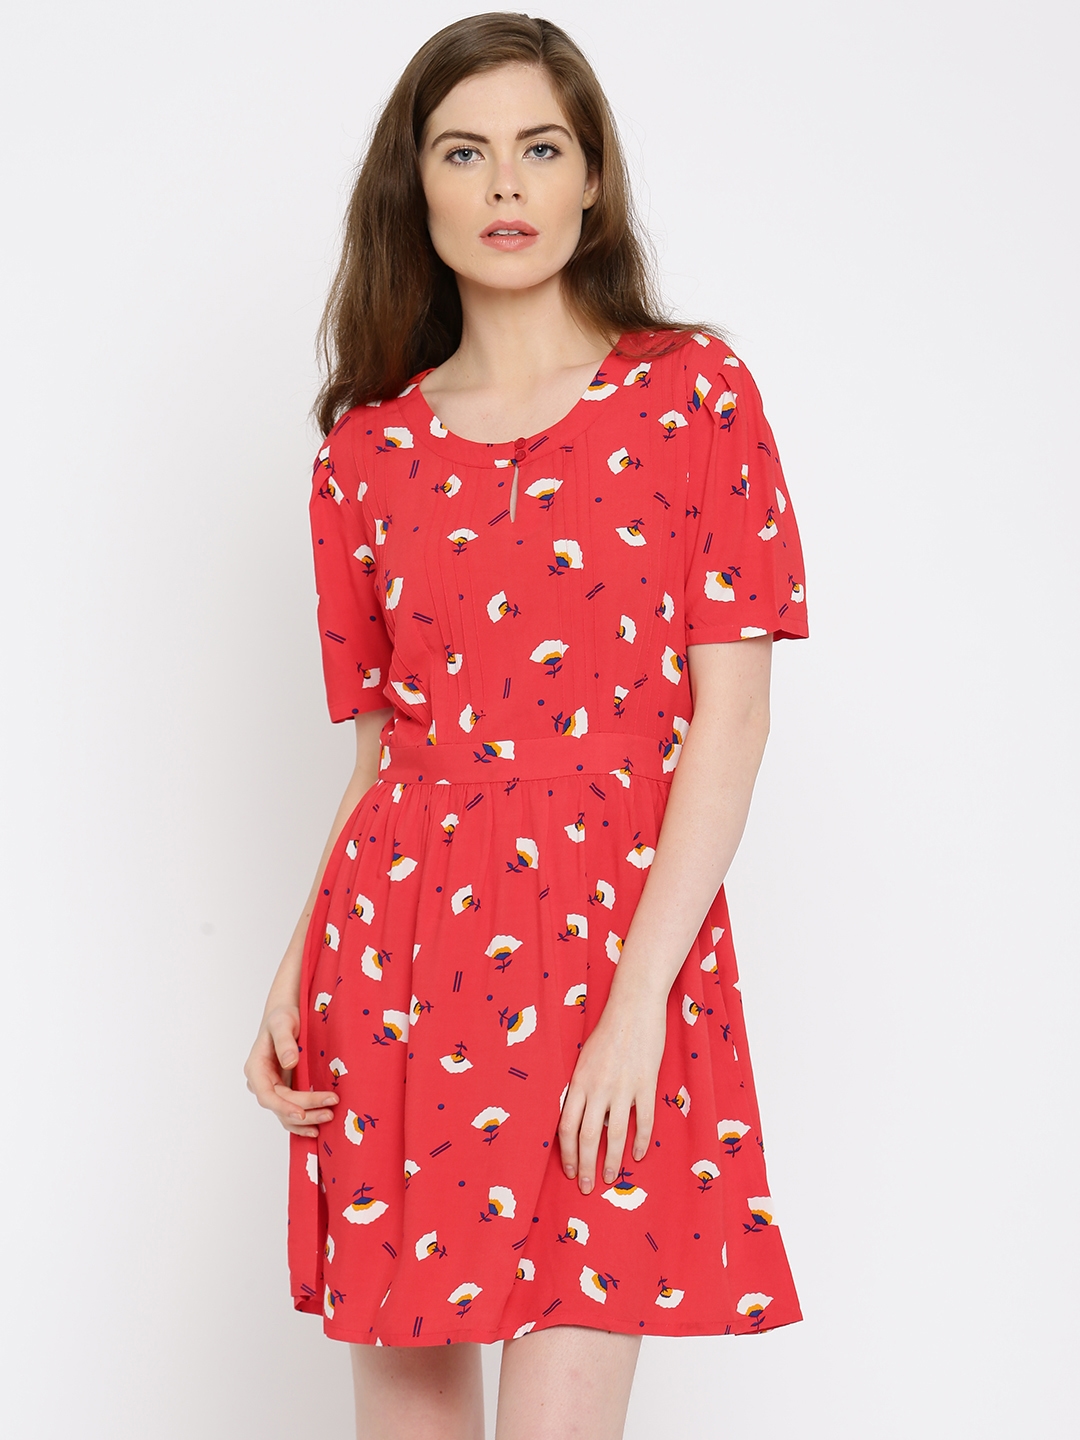 Buy Allen Solly Woman Red Floral Print ...